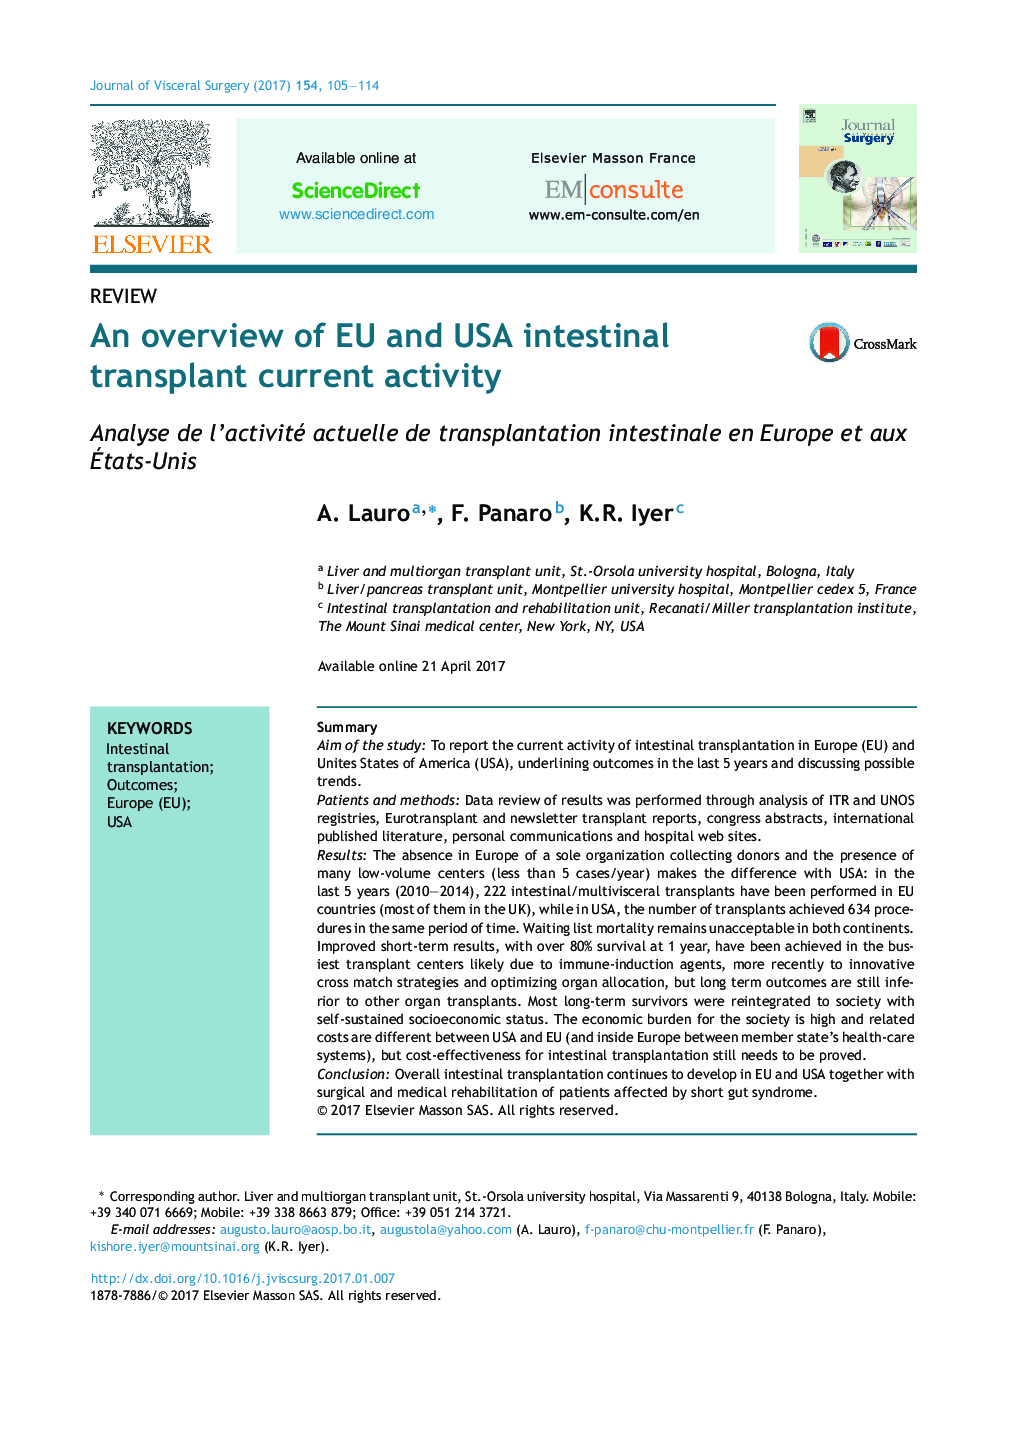 An overview of EU and USA intestinal transplant current activity